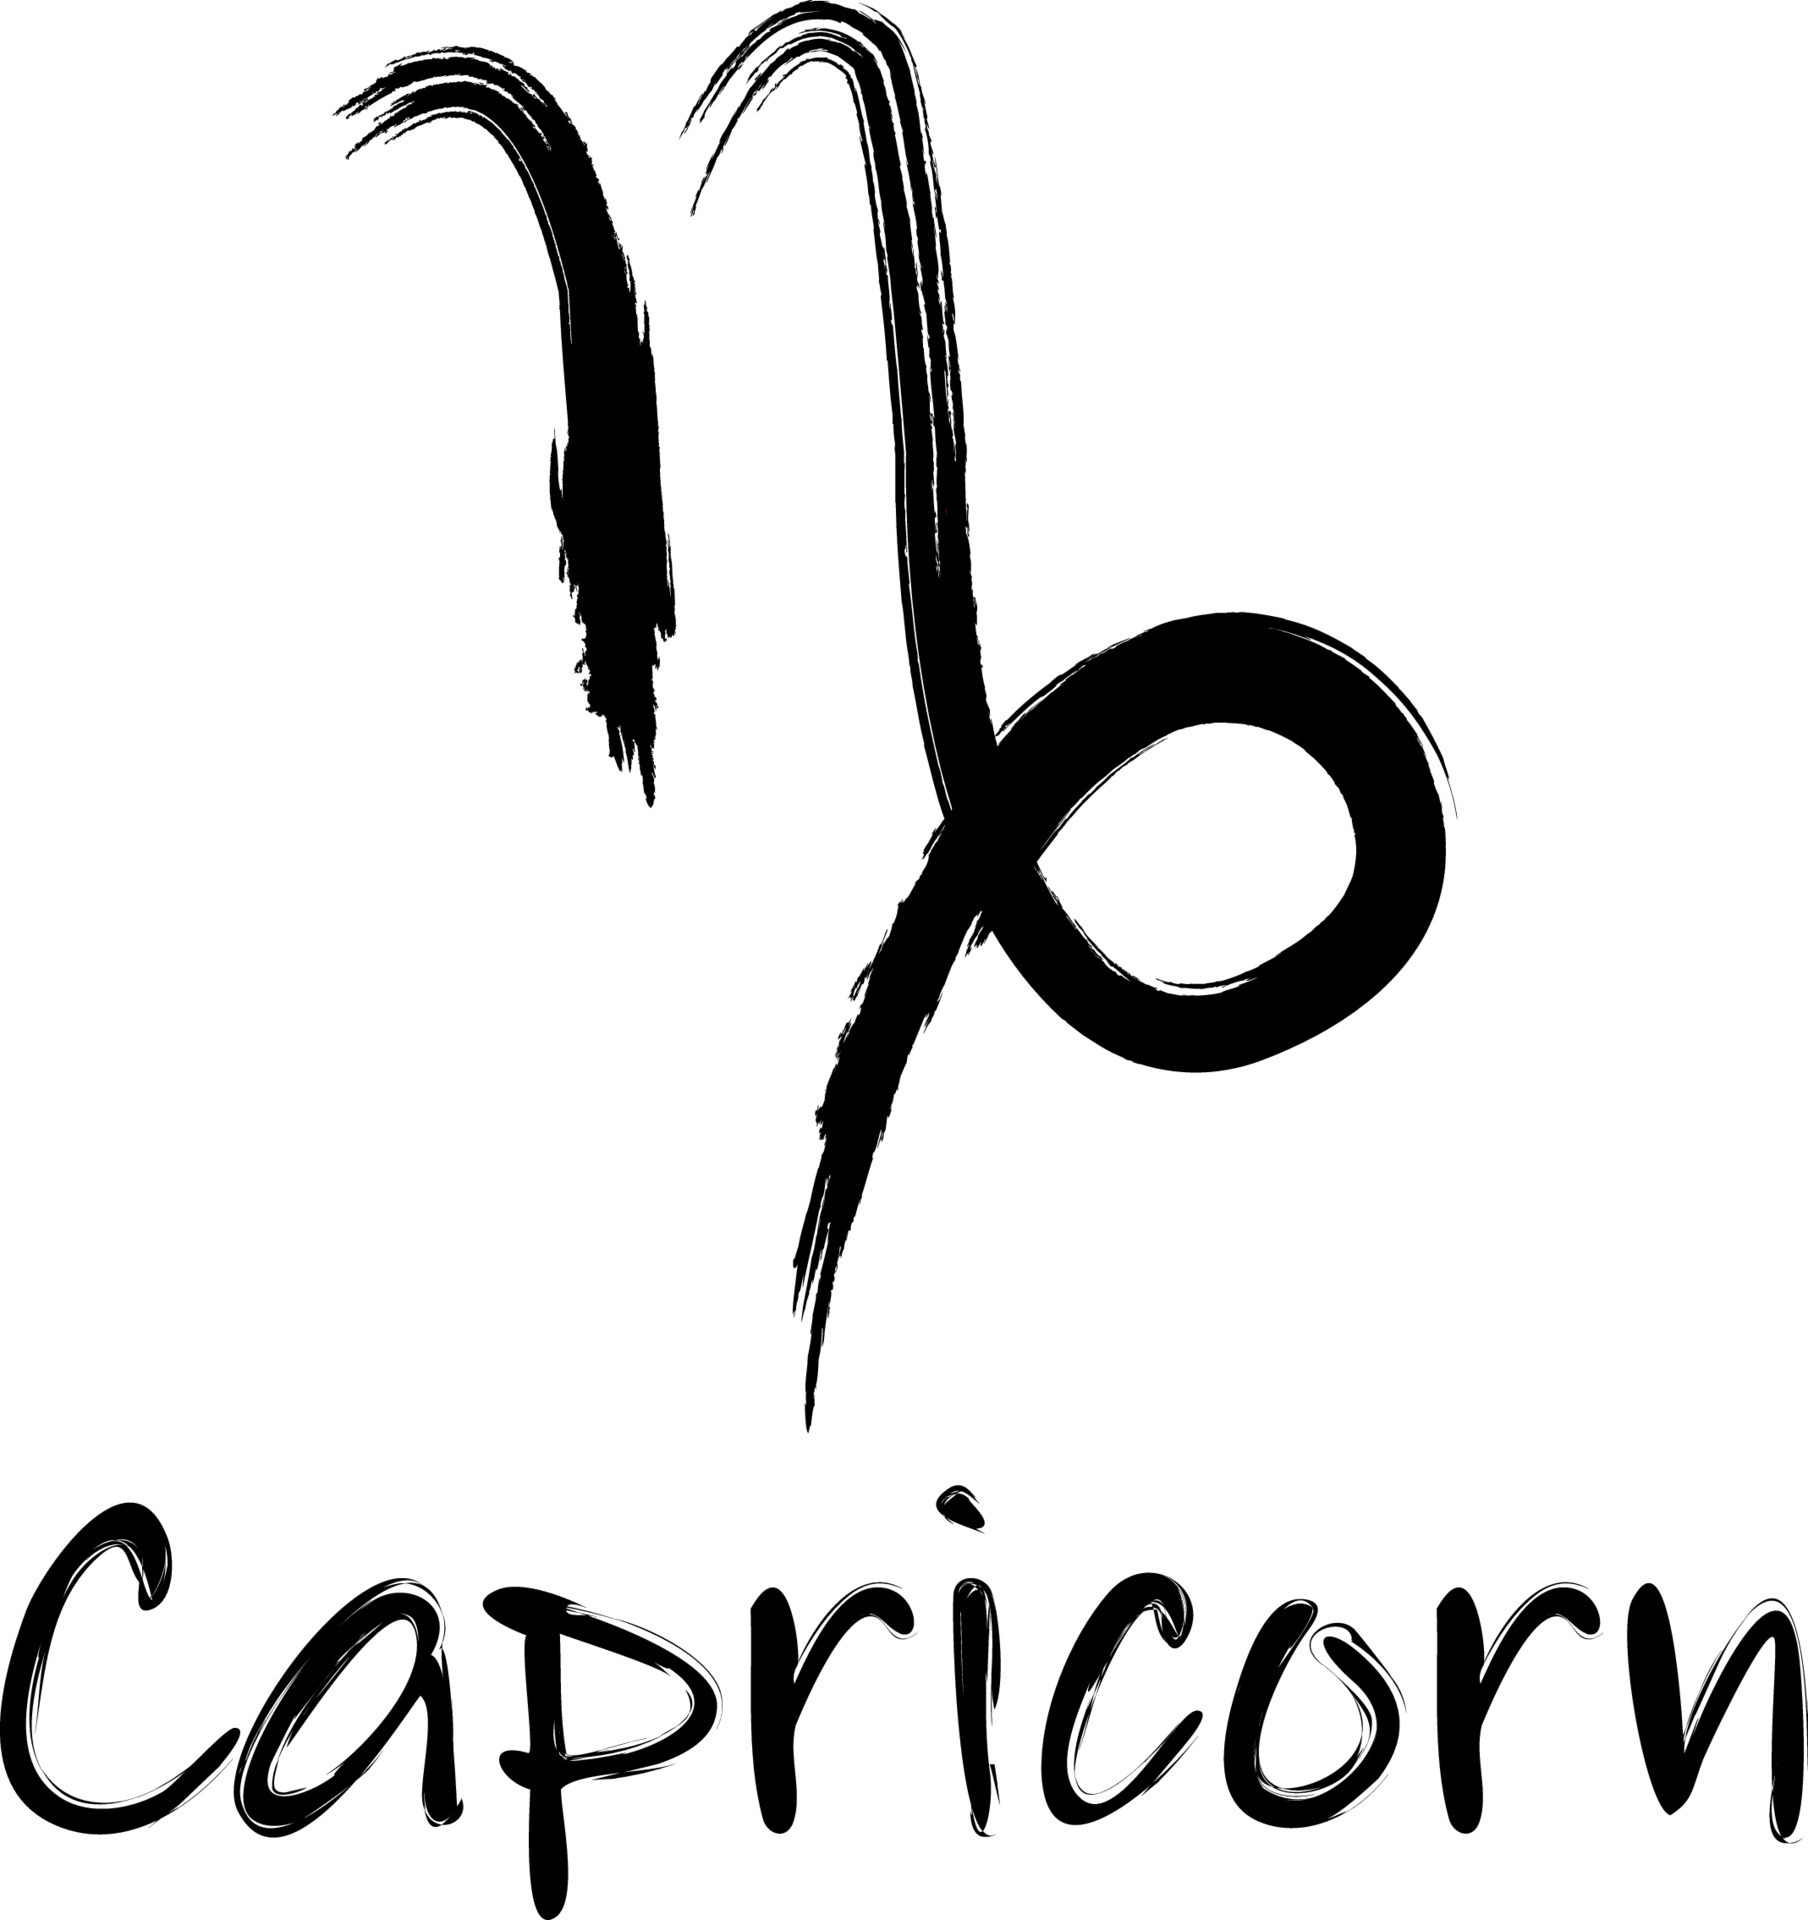 Capricorn. Zodiac signs painted with a black brush. 9157807 Vector Art ...